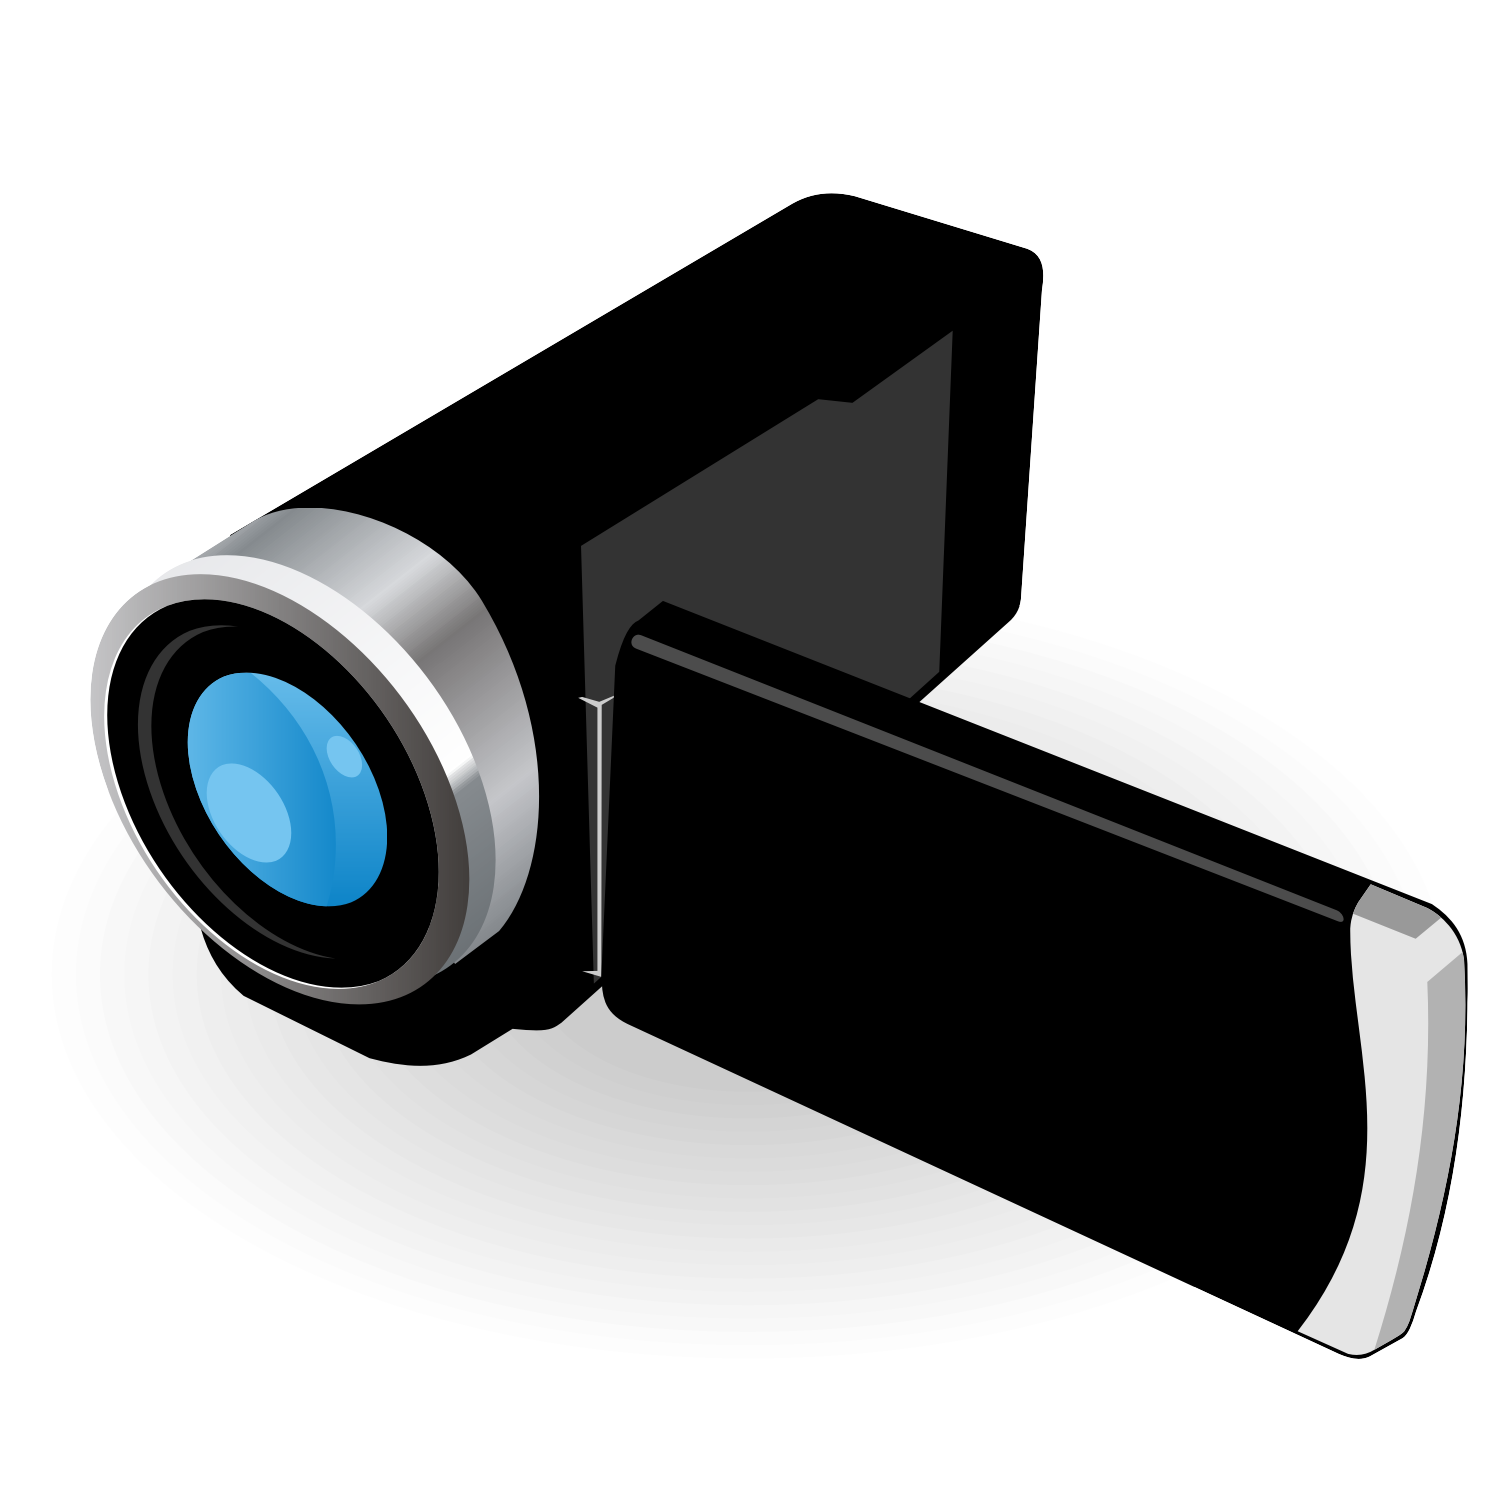 video camera clipart images - photo #37